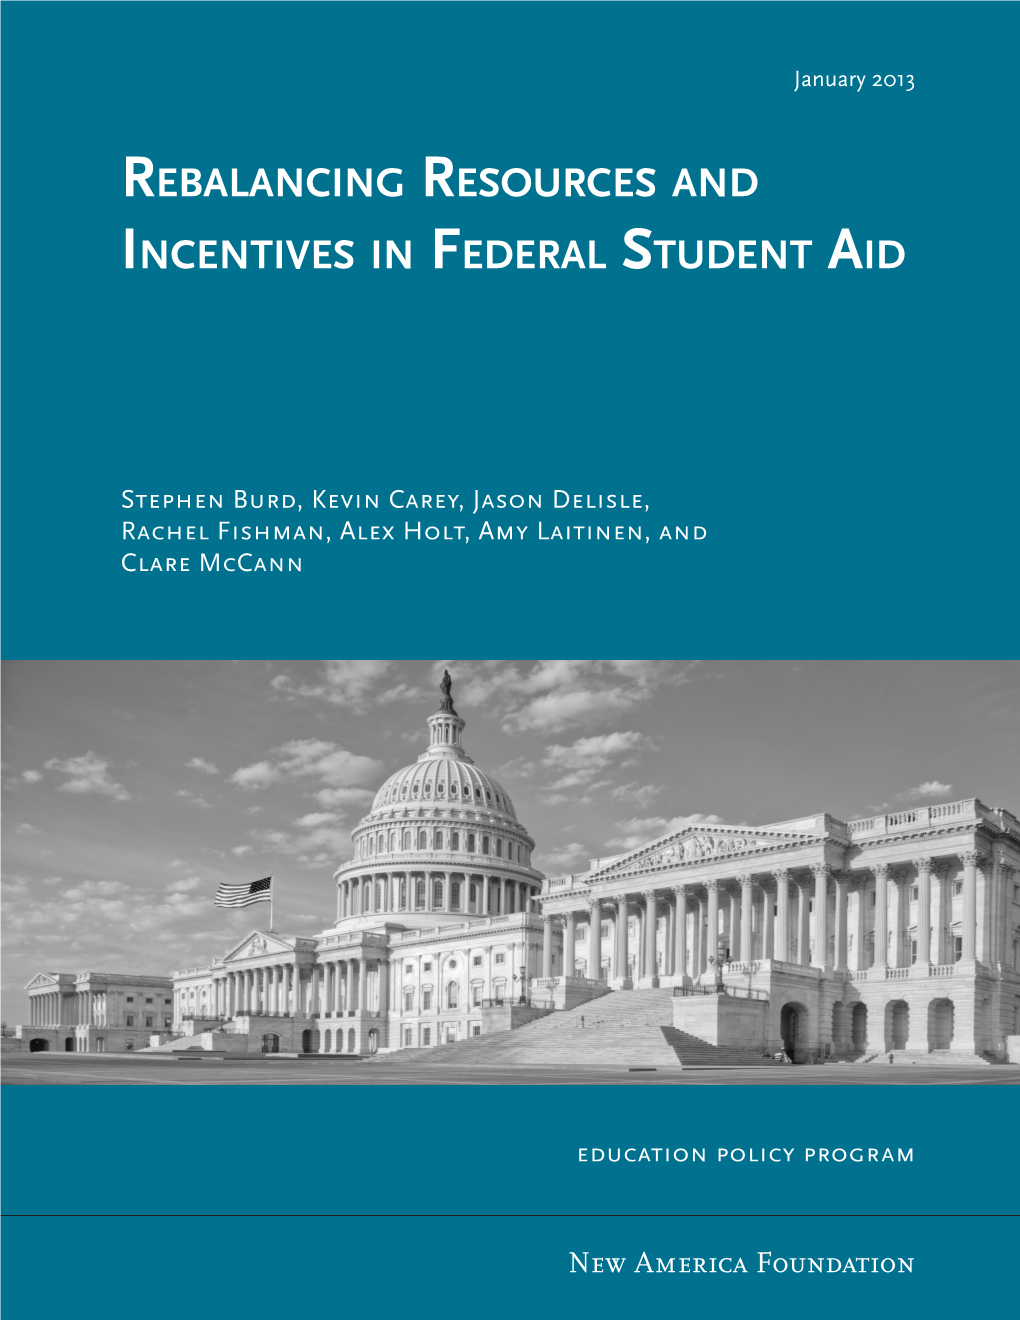 Rebalancing Resources and Incentives in Federal Student Aid